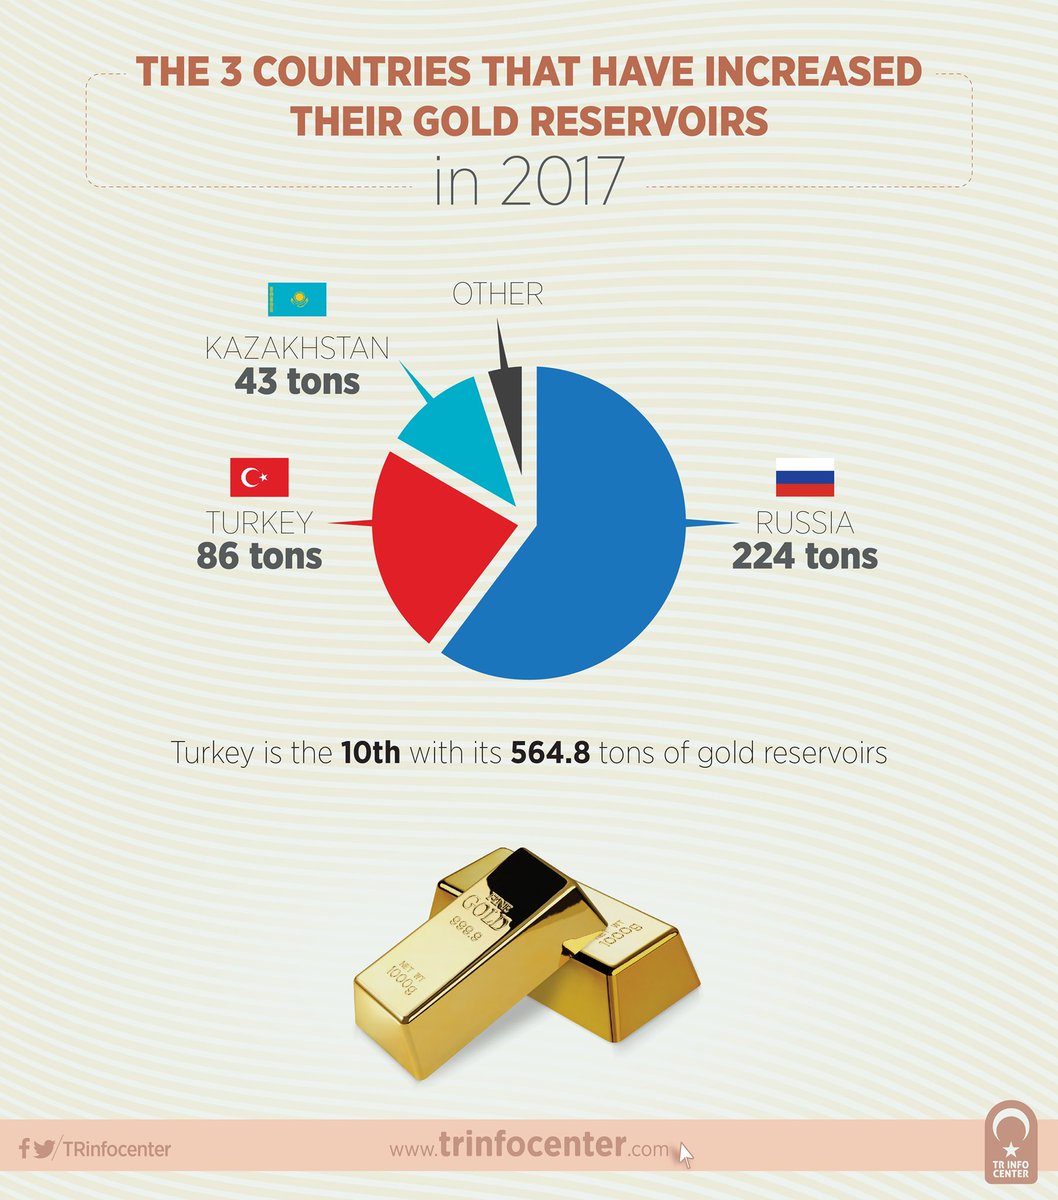 The 3 countries that have increased their gold reservoirs in 2017